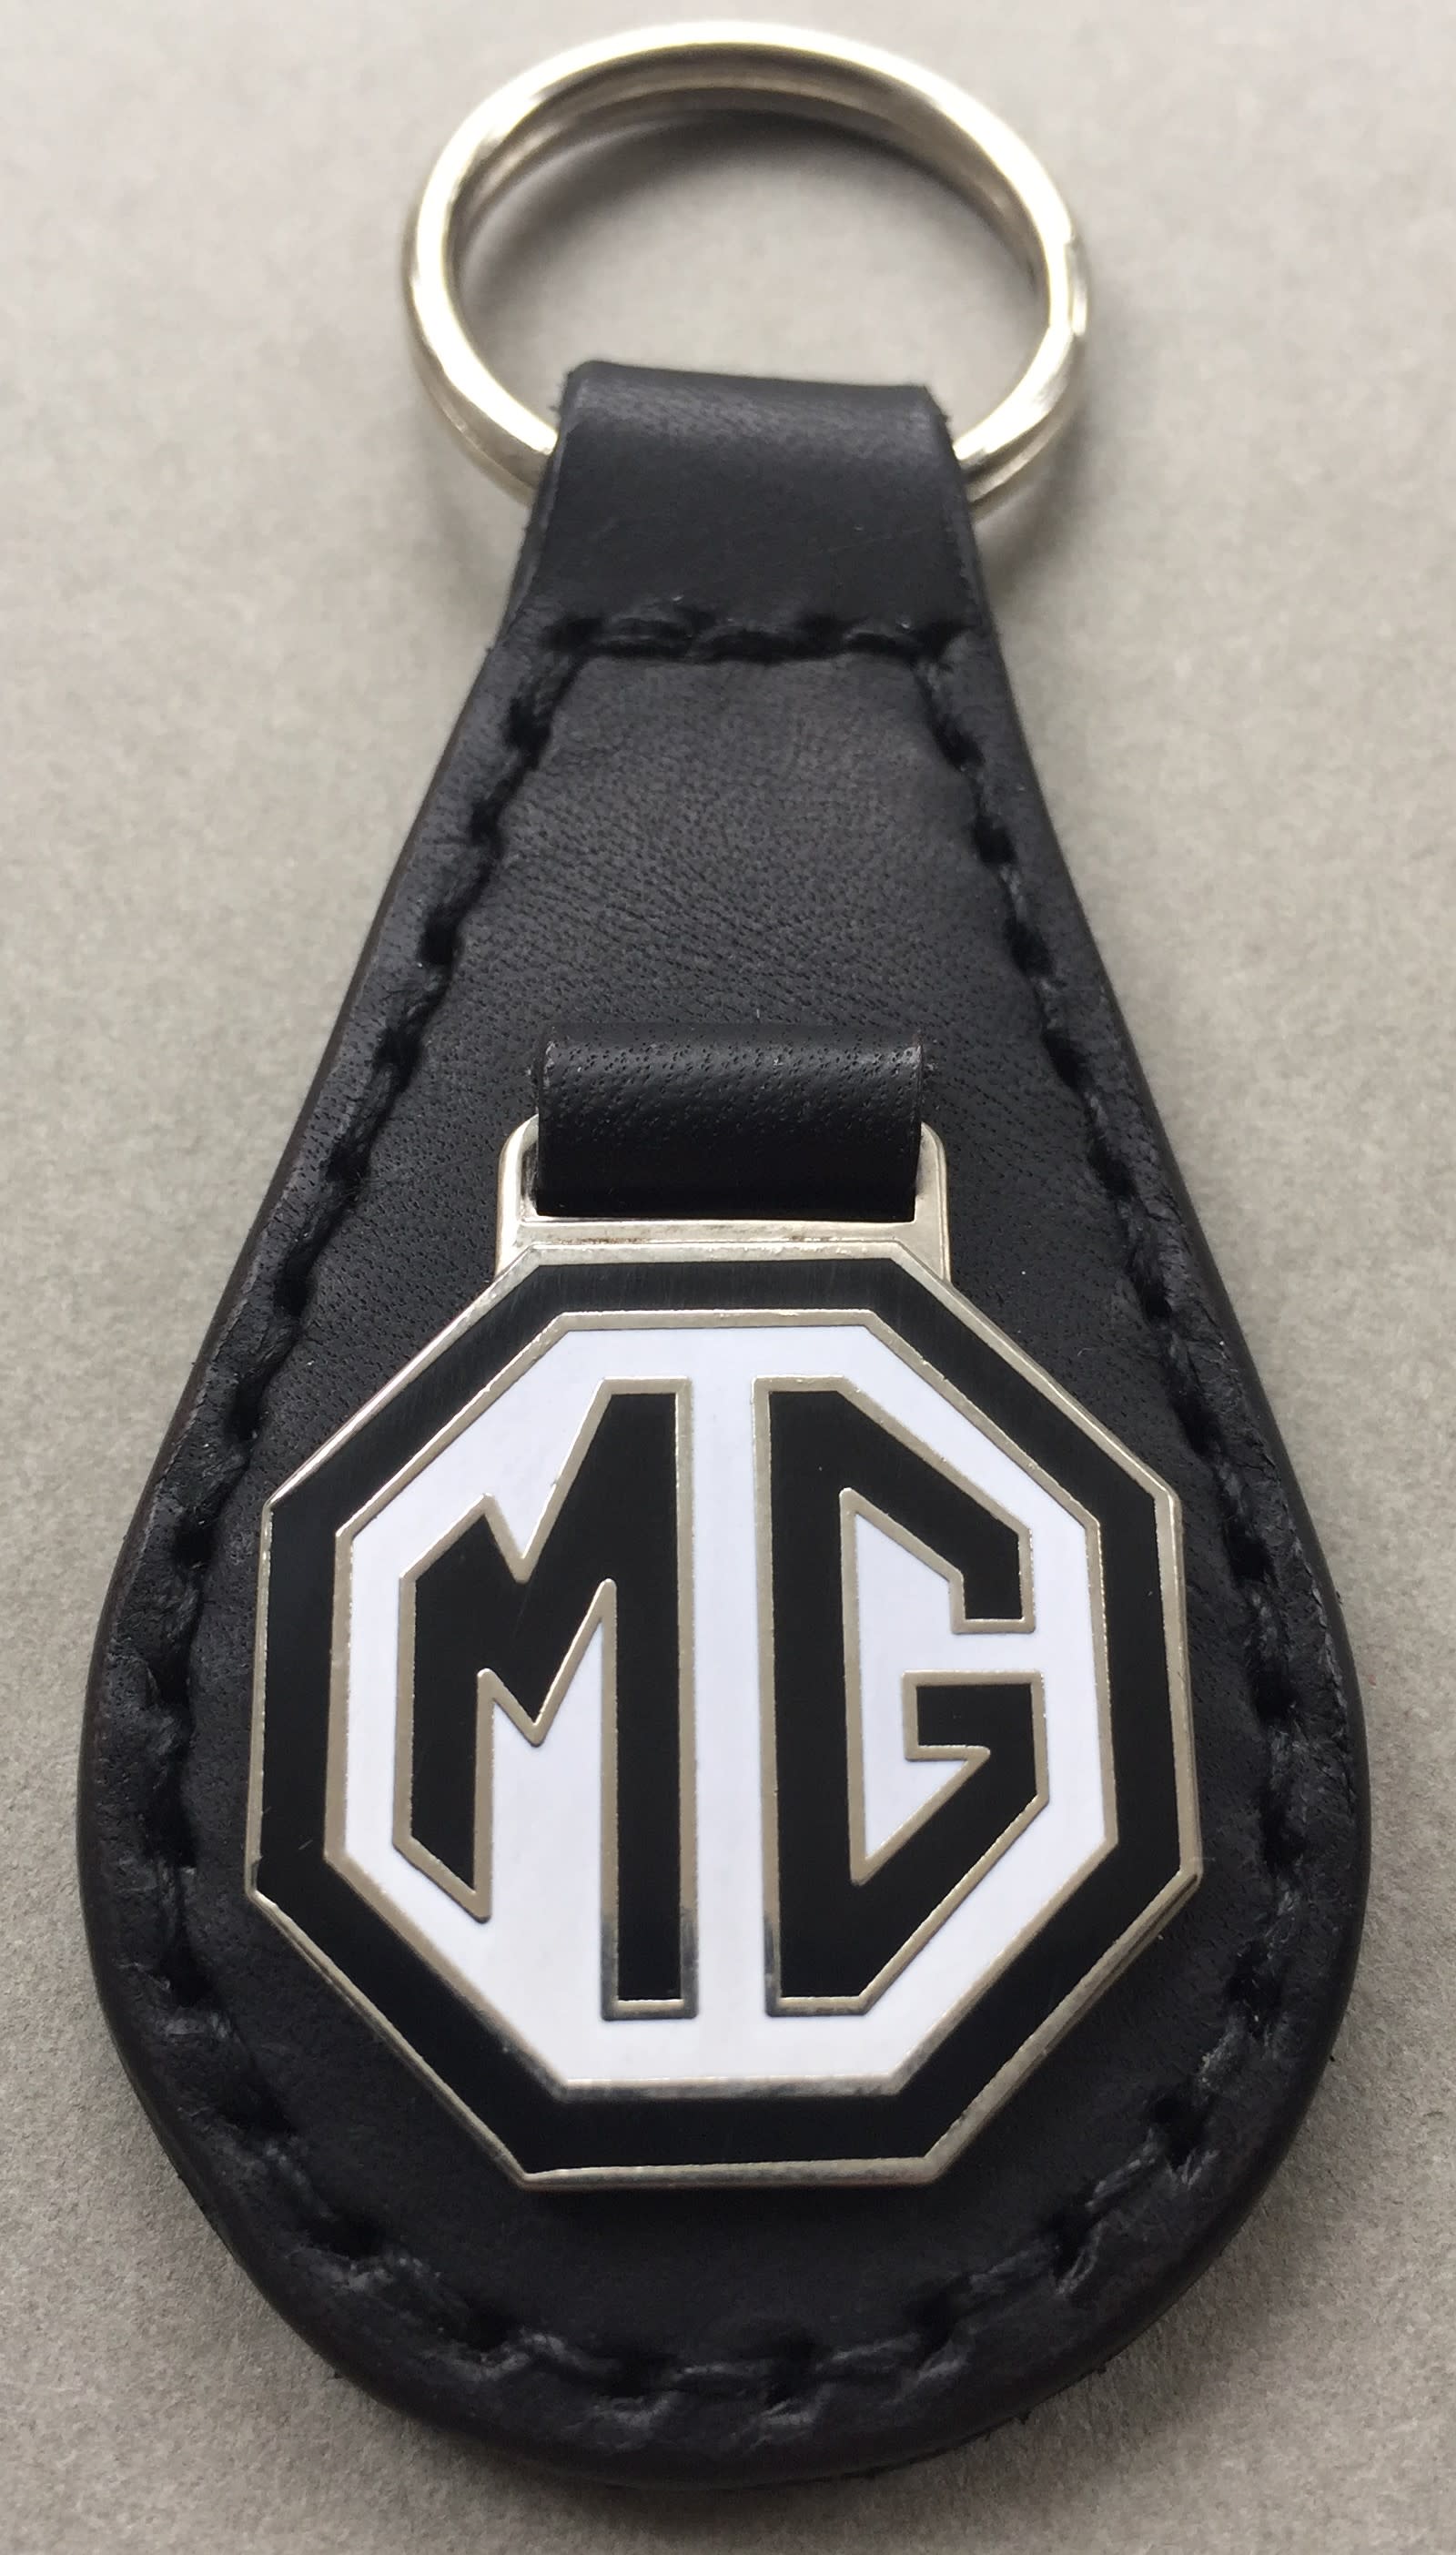 MGB Enamel and leather key ring 